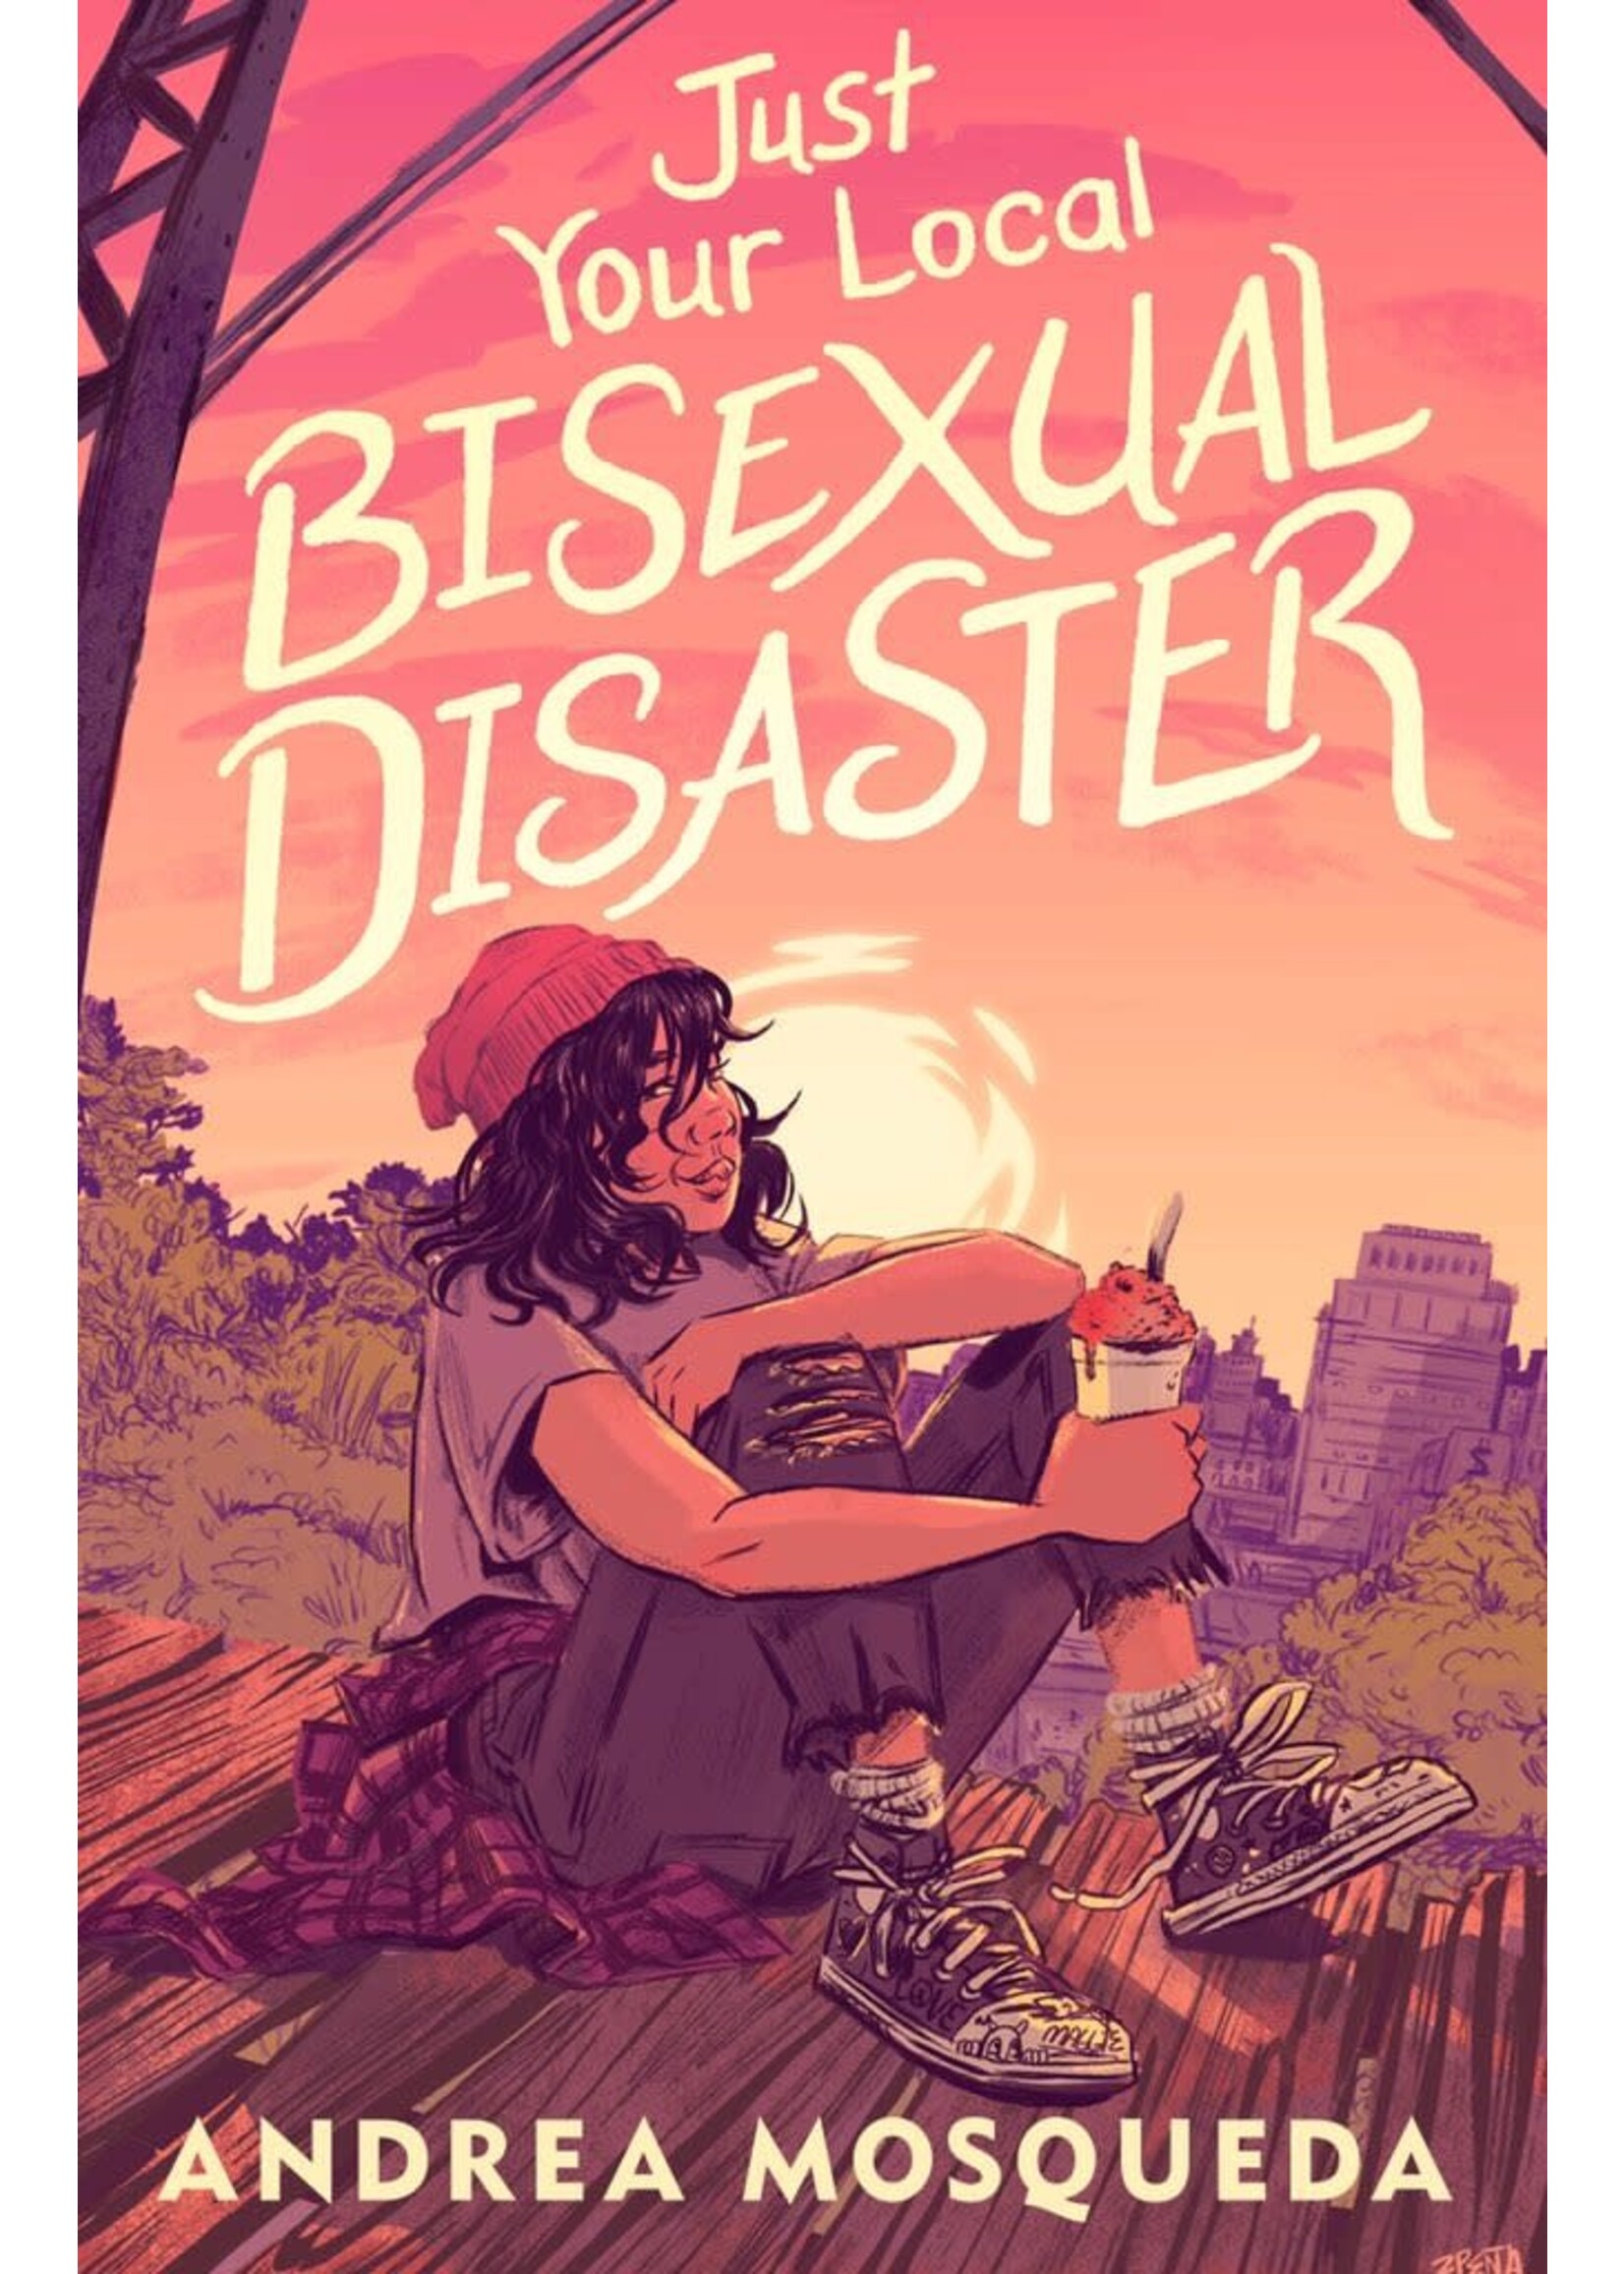 Just Your Local Bisexual Disaster by Andrea Mosqueda